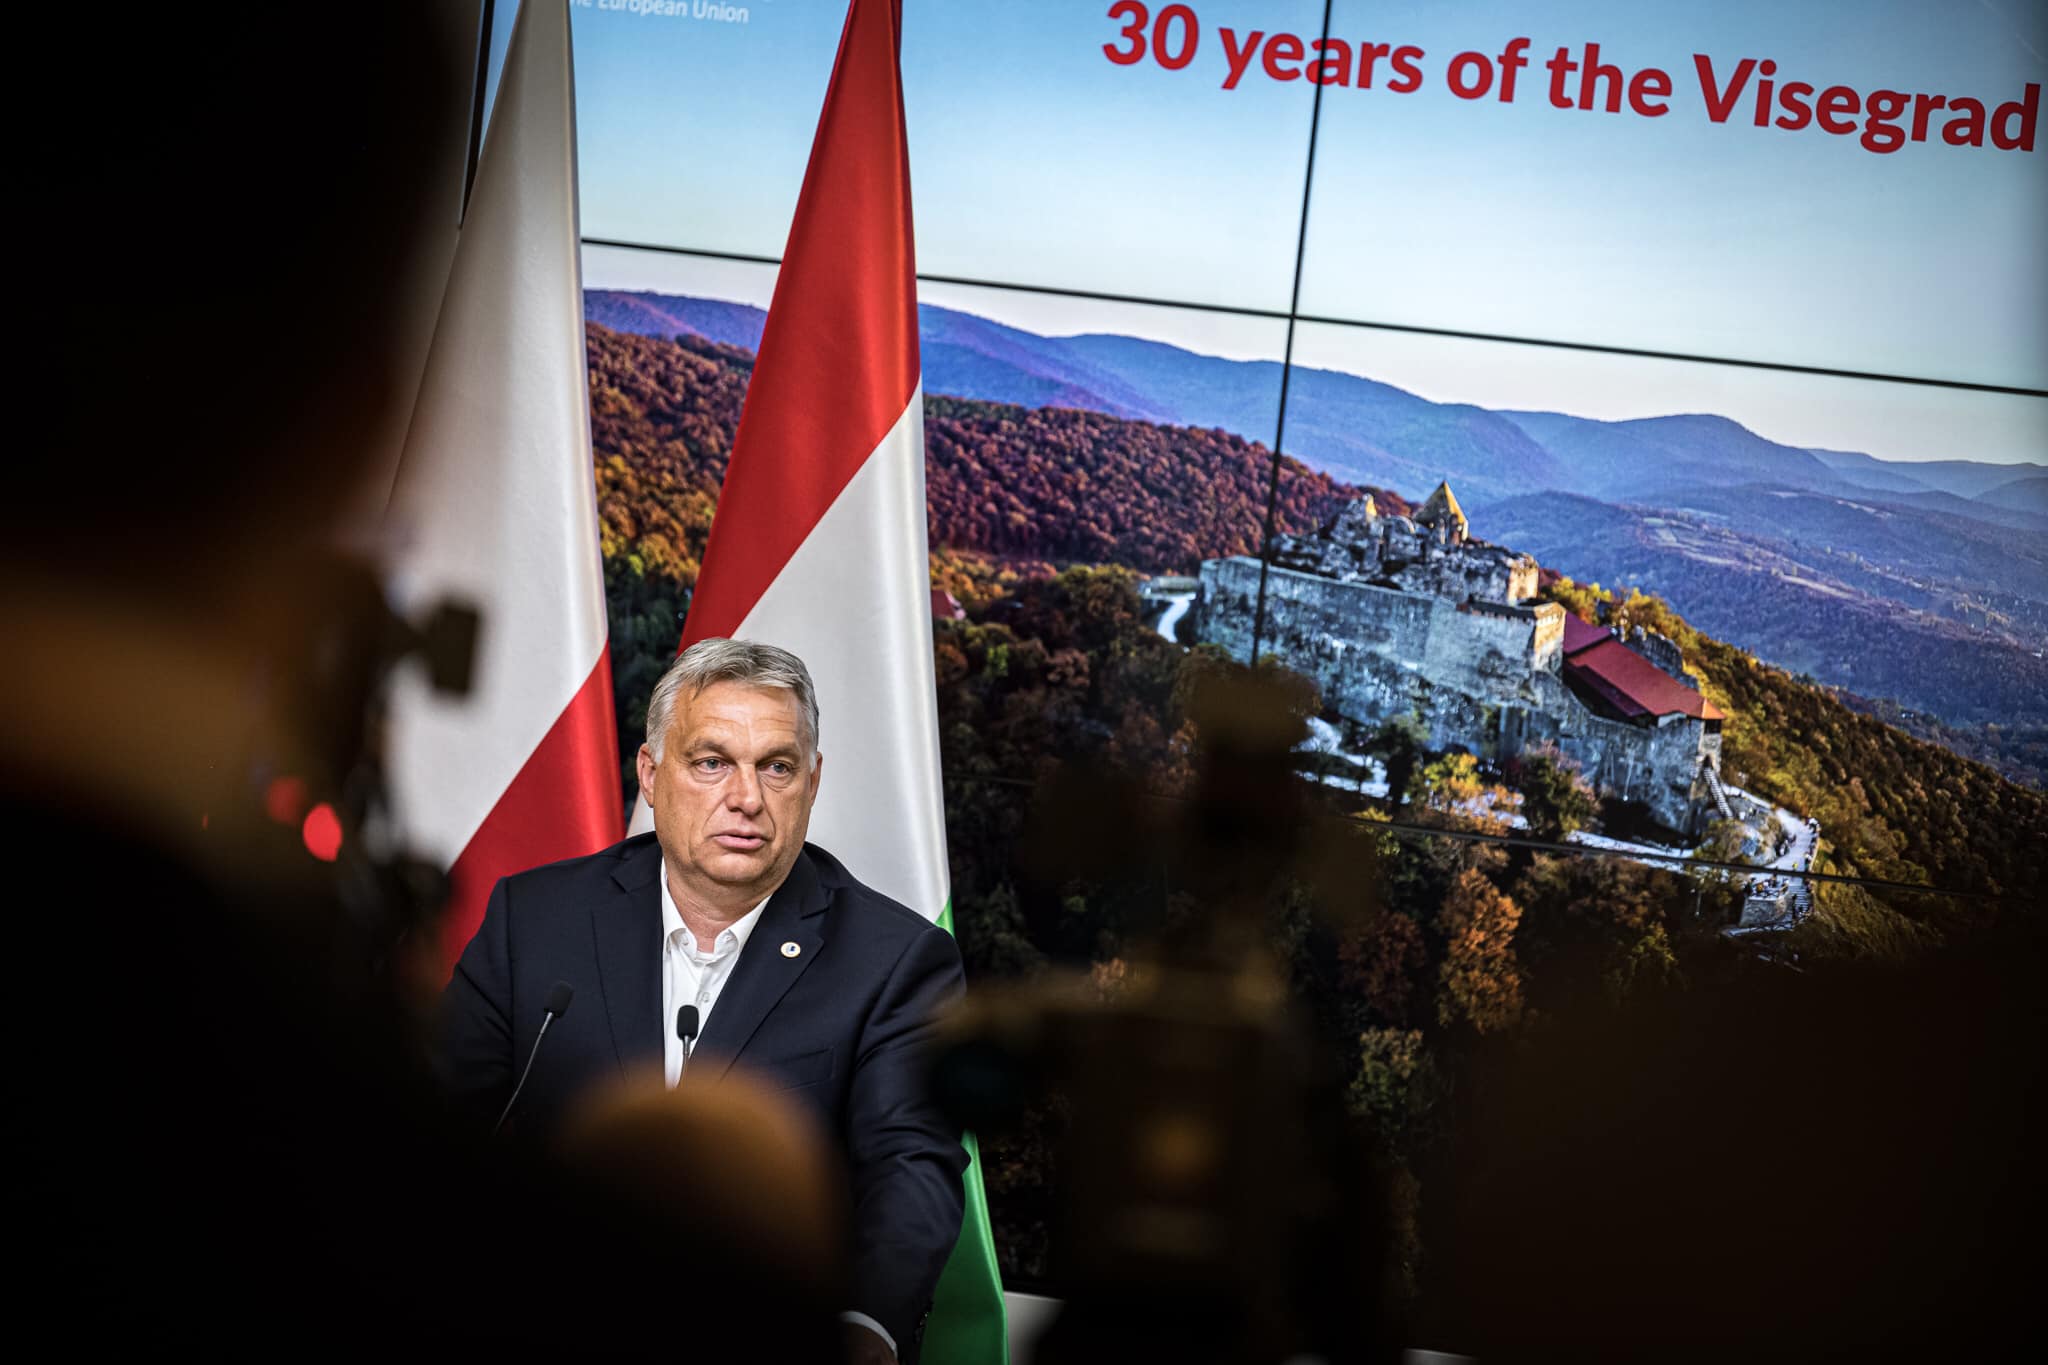 EU Summit: Orbán: Hungary, Poland 'Protected National Pride'